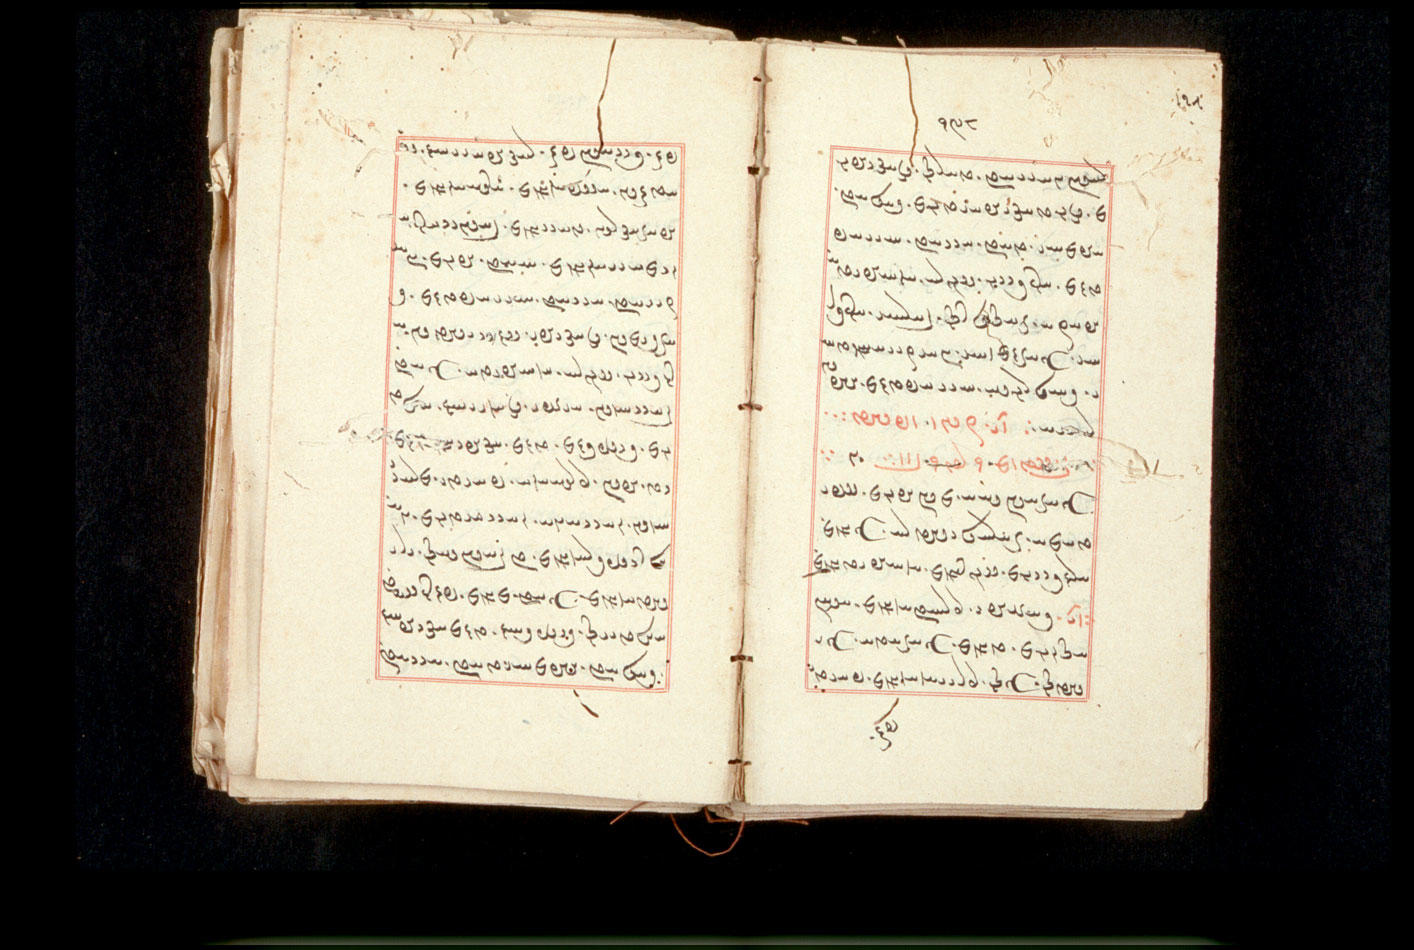 Folios 198v (right) and 199r (left)